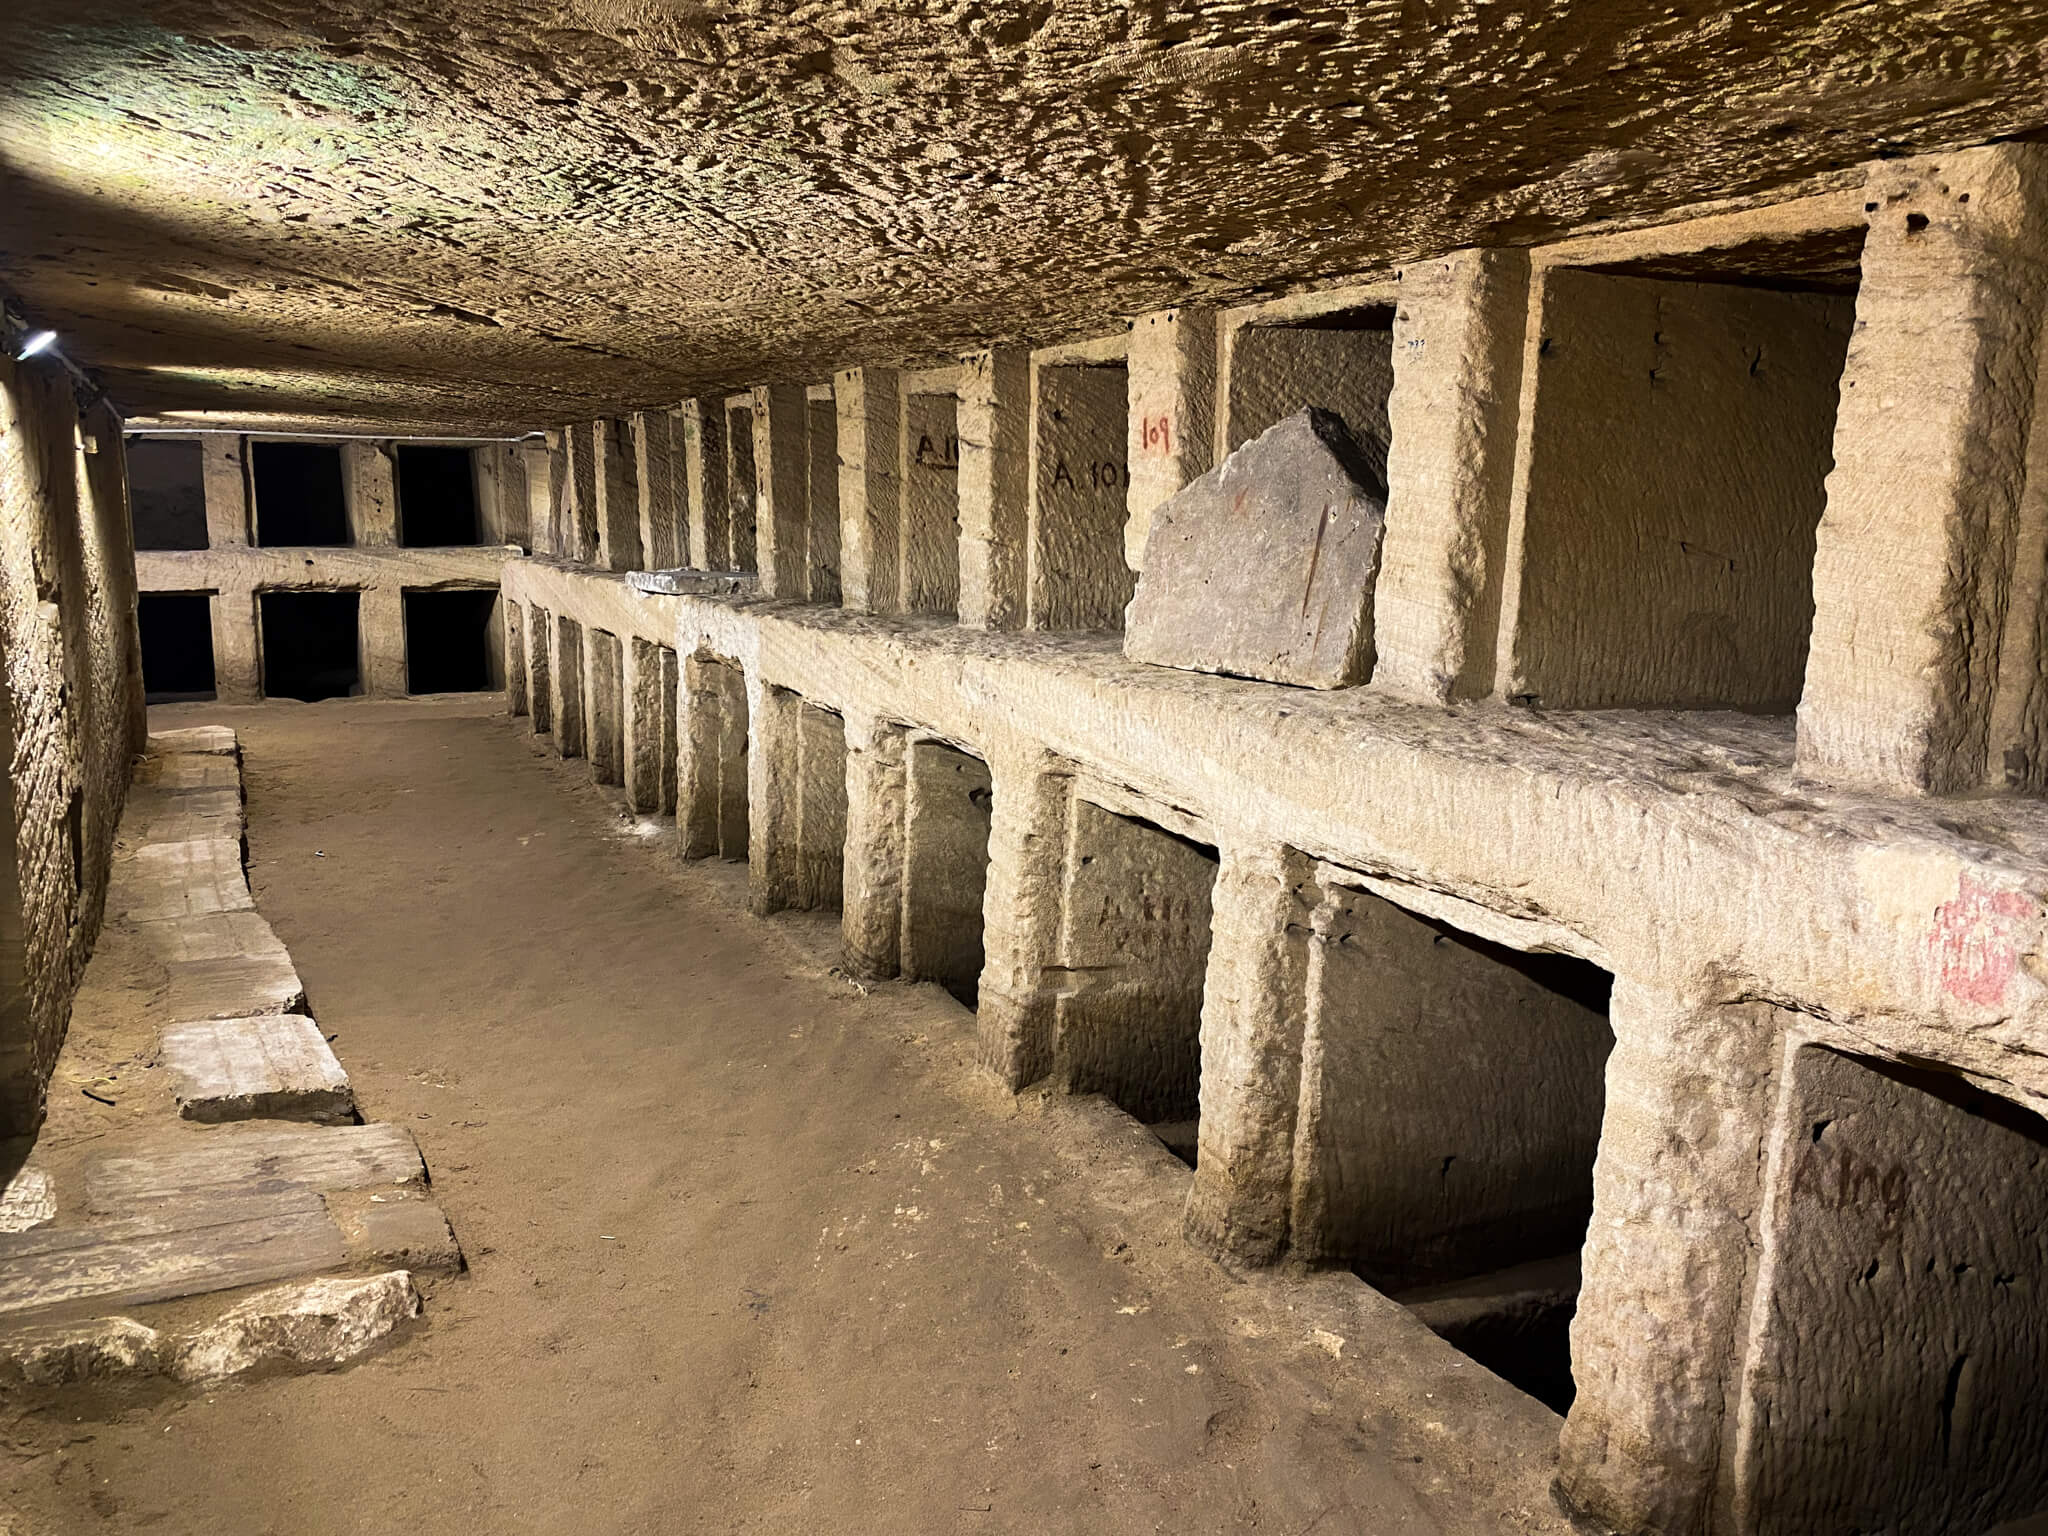 Rows of burial underground chambers.